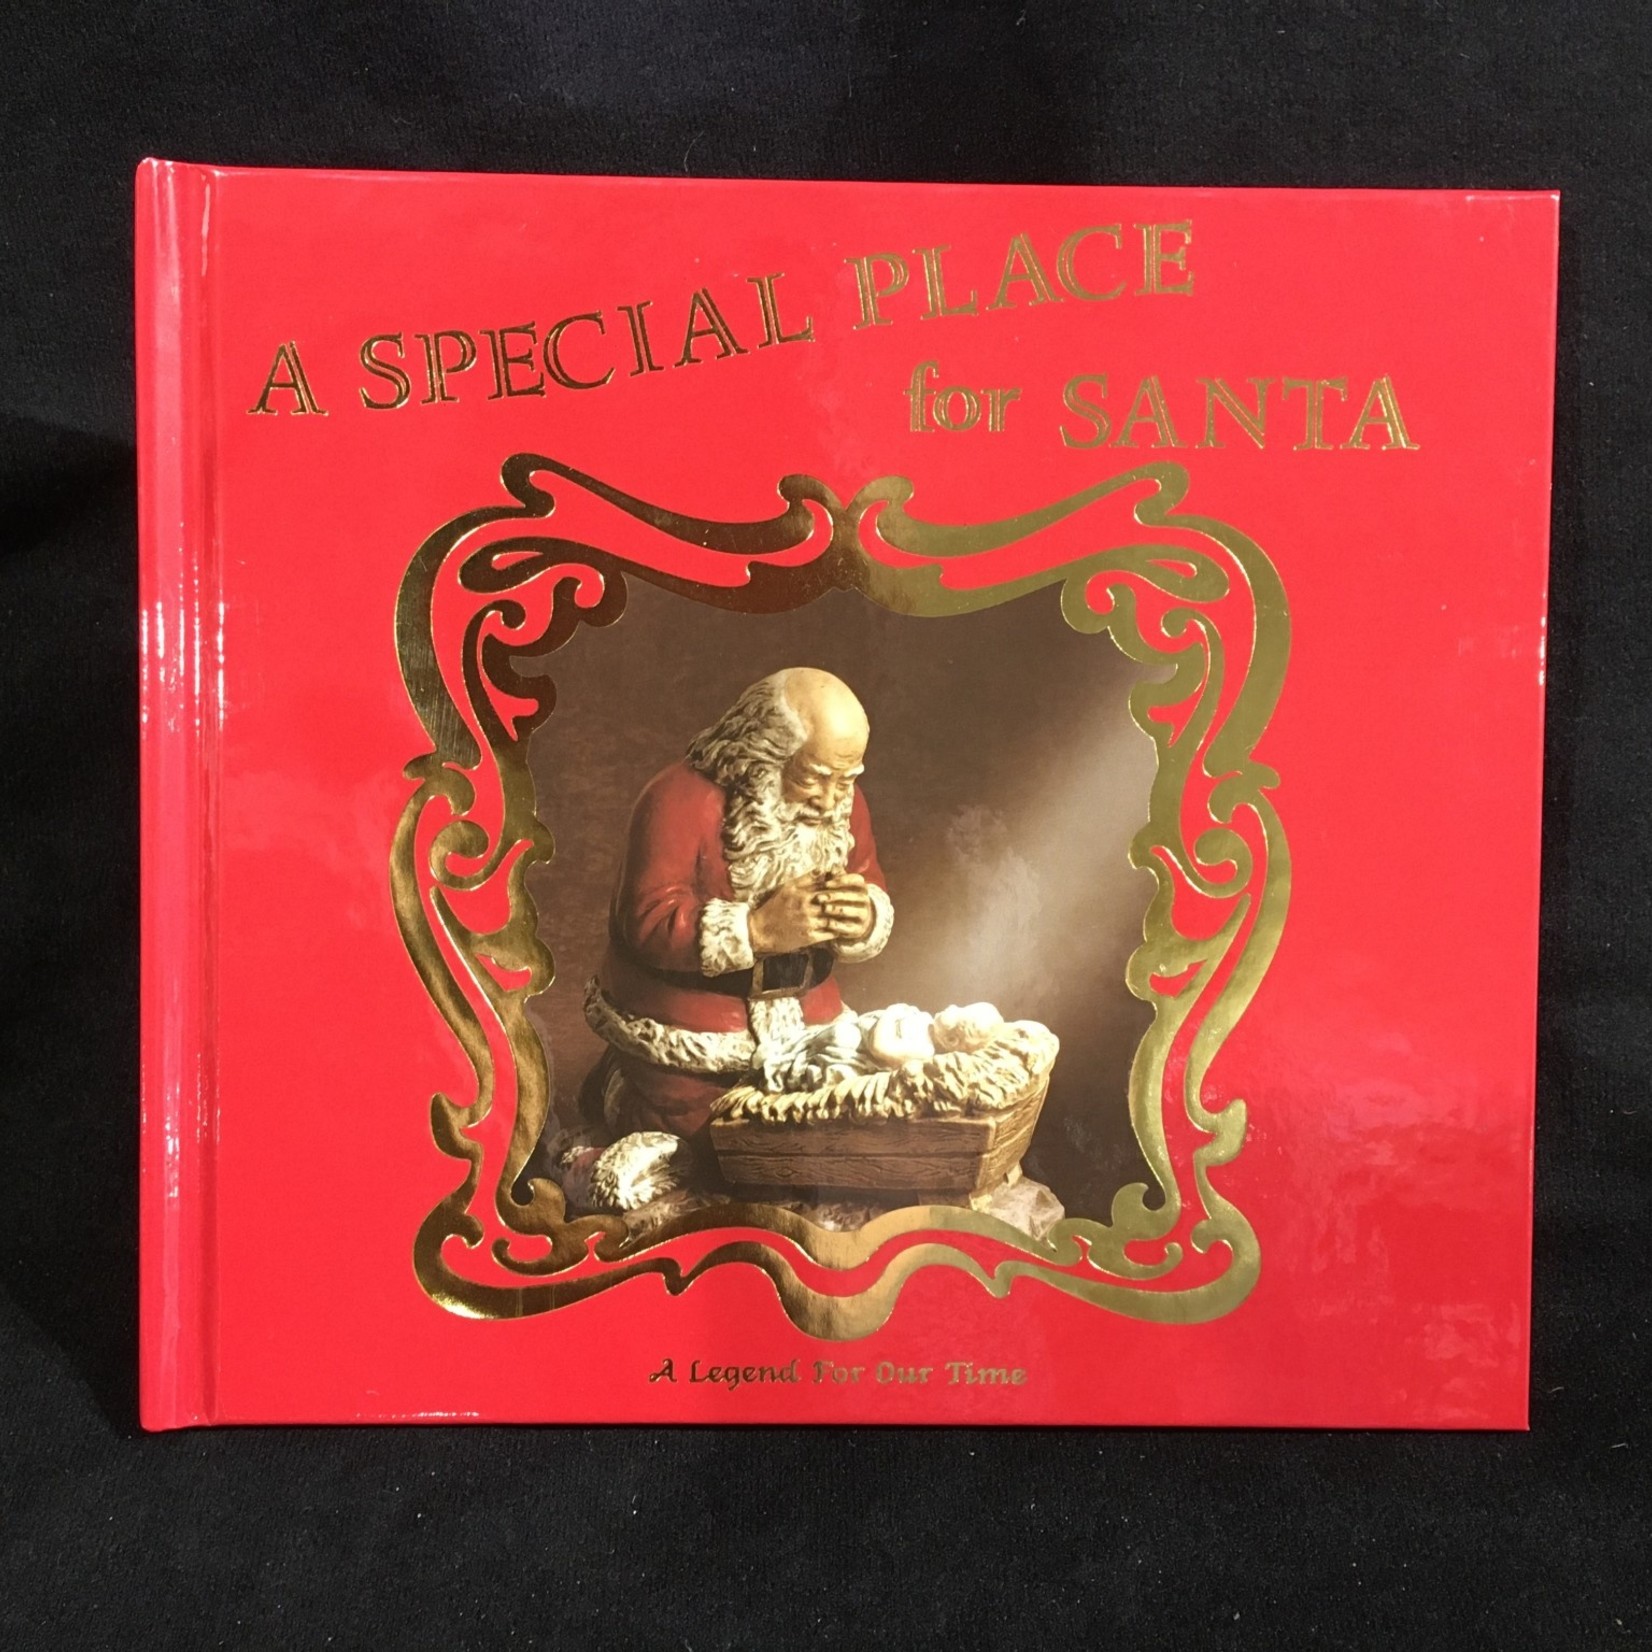 **"A Special Place for Santa" Book